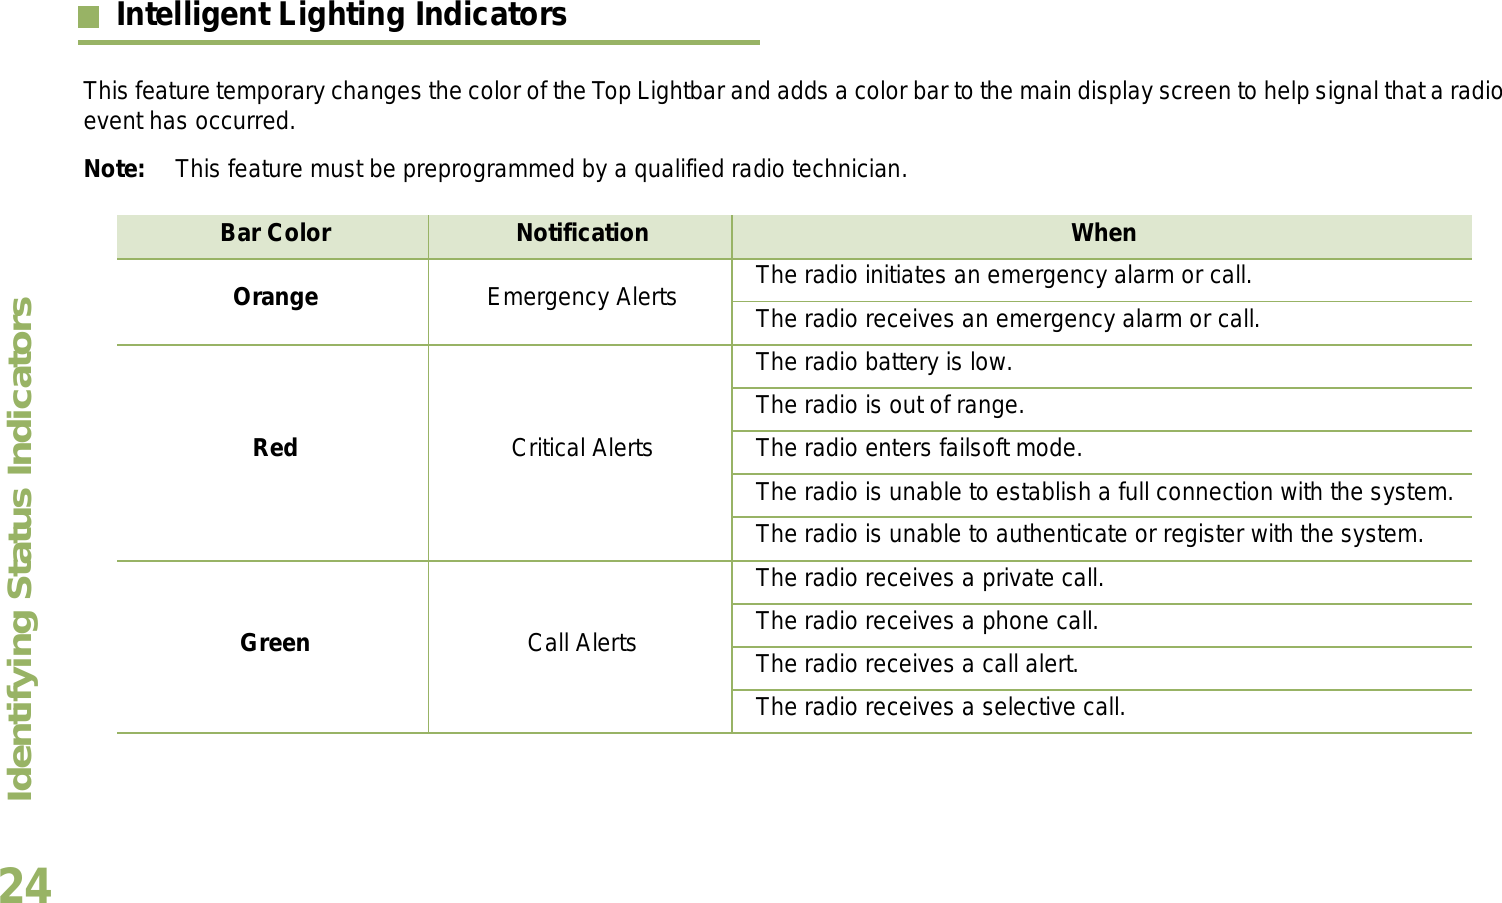 Identifying Status IndicatorsEnglish24Intelligent Lighting Indicators  This feature temporary changes the color of the Top Lightbar and adds a color bar to the main display screen to help signal that a radio event has occurred. Note: This feature must be preprogrammed by a qualified radio technician.Bar Color Notification WhenOrange Emergency Alerts The radio initiates an emergency alarm or call.The radio receives an emergency alarm or call.Red Critical AlertsThe radio battery is low.The radio is out of range.The radio enters failsoft mode.The radio is unable to establish a full connection with the system.The radio is unable to authenticate or register with the system.Green Call AlertsThe radio receives a private call.The radio receives a phone call.The radio receives a call alert.The radio receives a selective call.